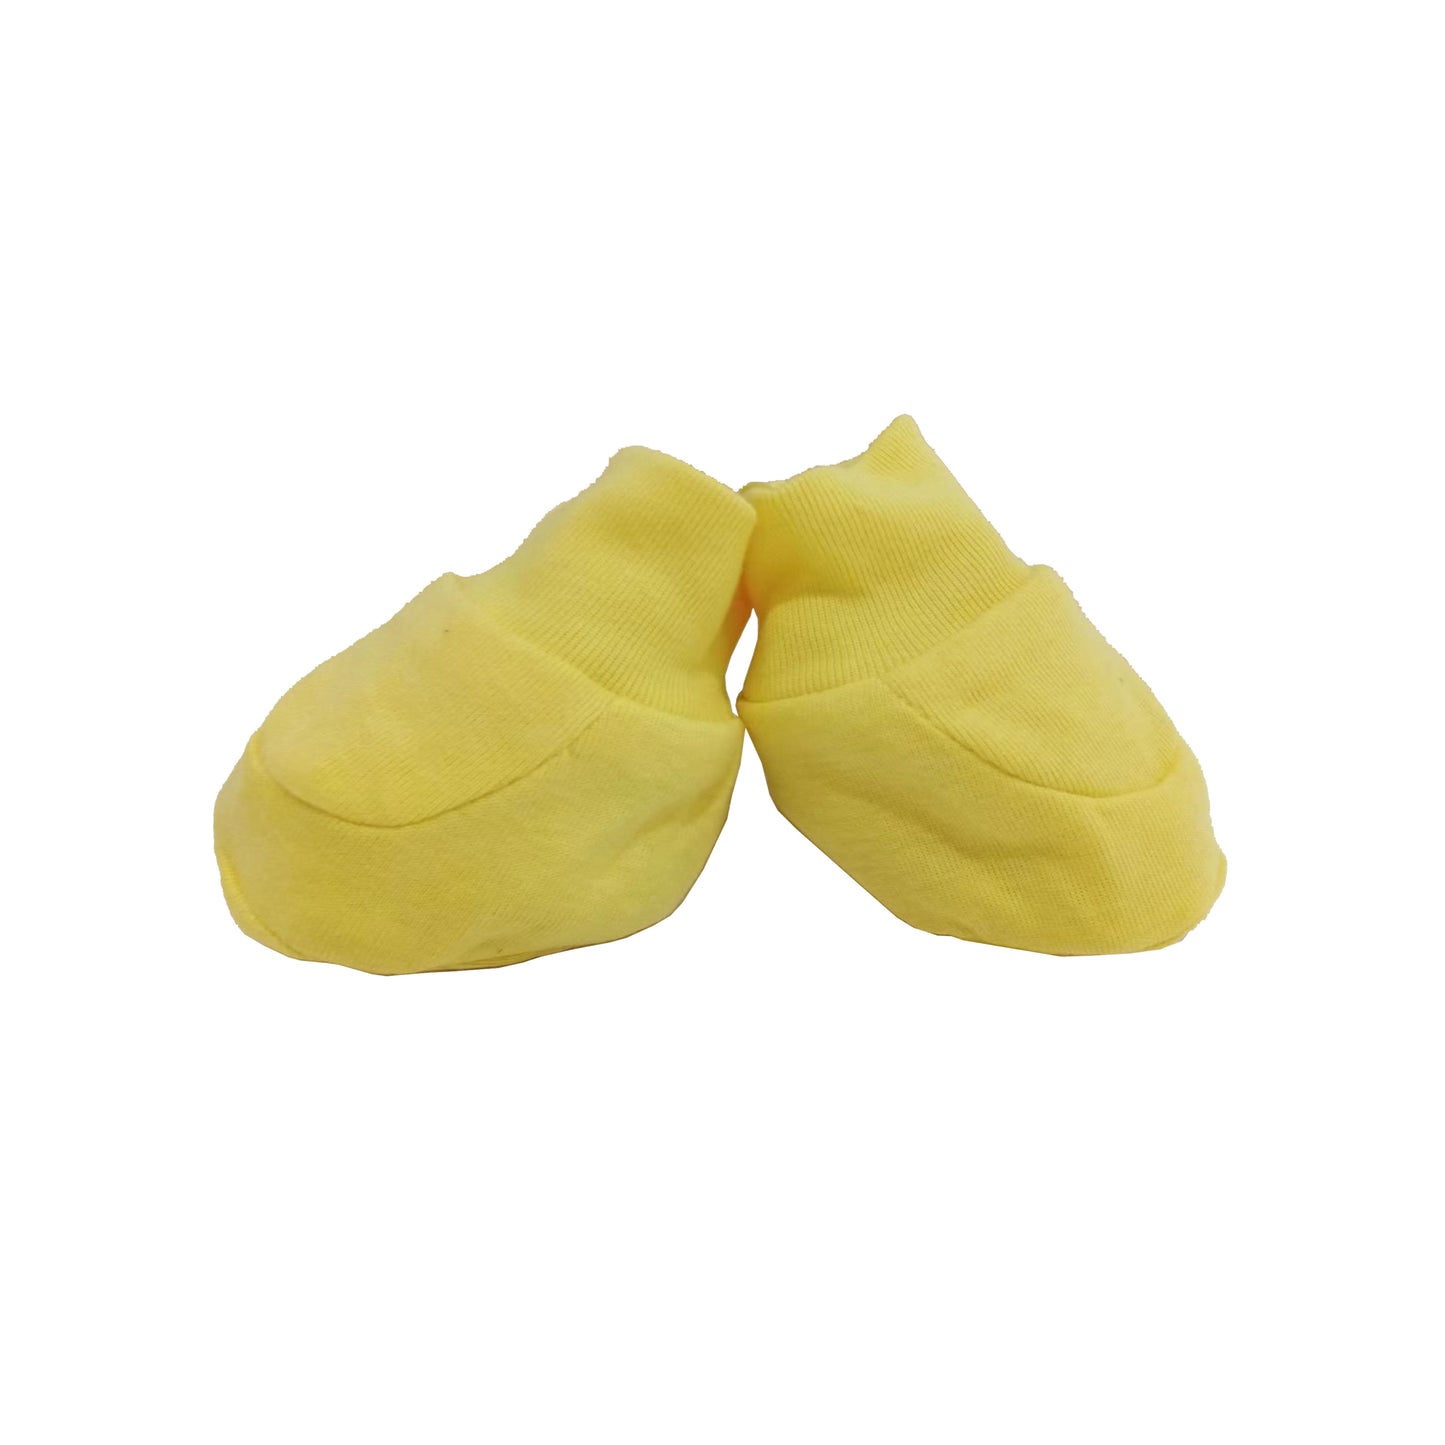 BOOTIES - BABY - 3 COLOR (YELLOW/CREAM/CERISE) - BEAU BBA